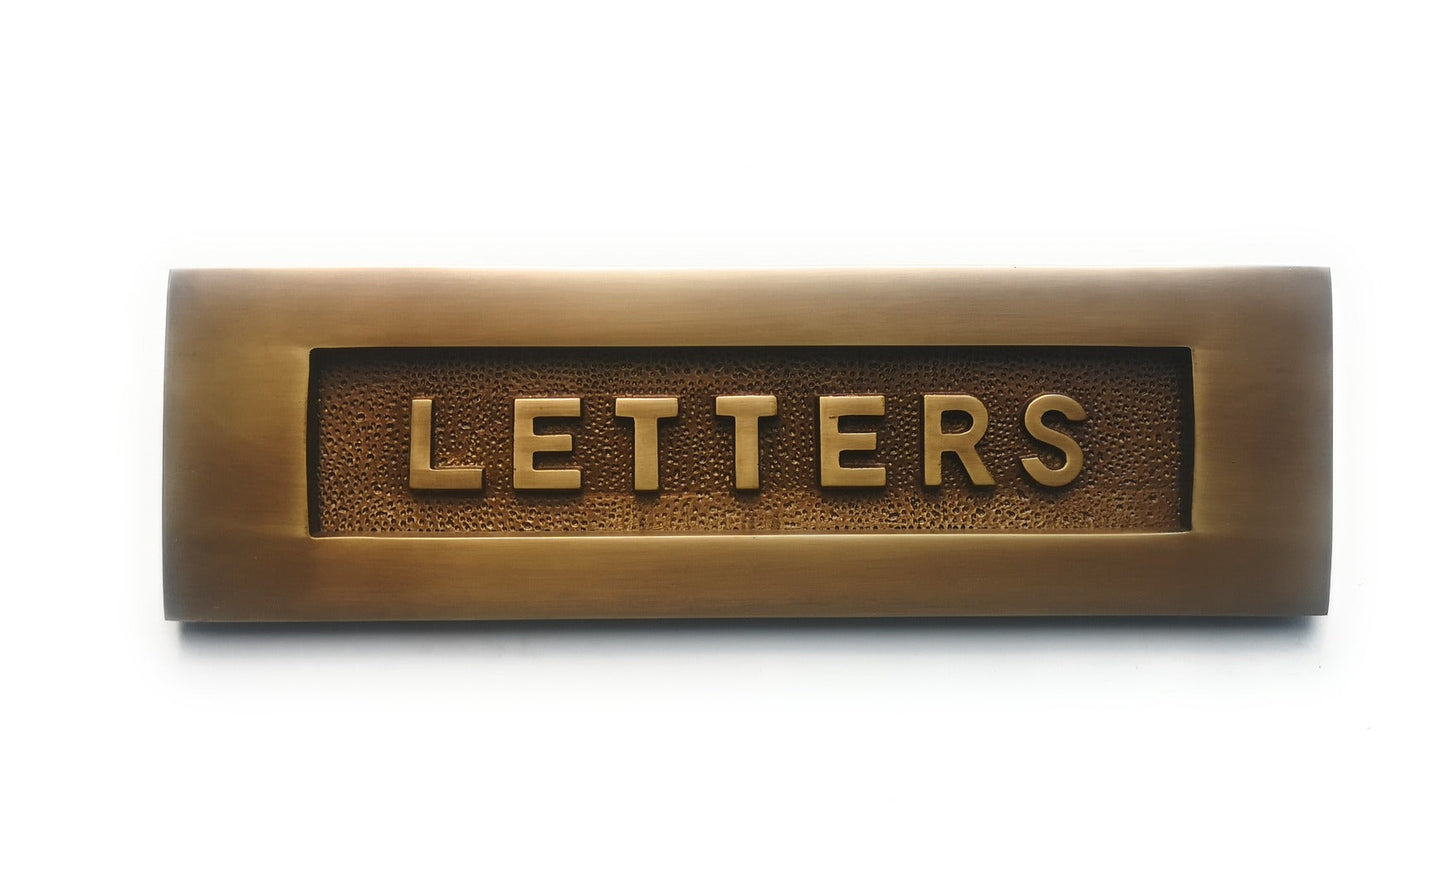 Antique Brass Letter Plate 10 x 3 inches - LETTERS Embossed on Solid Brass supplied with fixing bolts